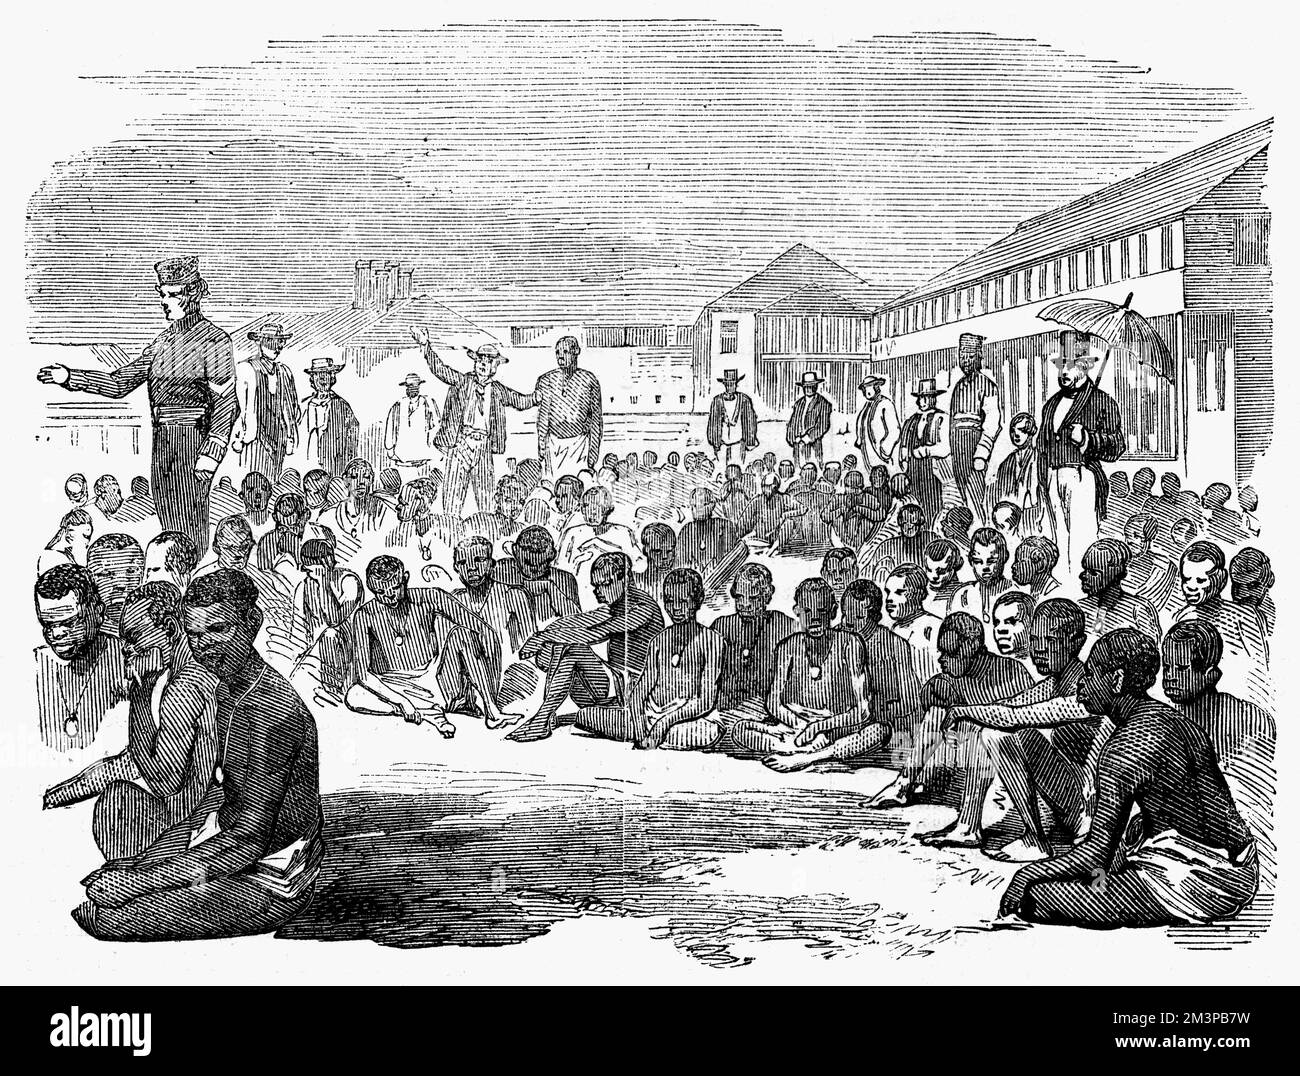 Group of slaves on the parade at Fort Augusta, Jamaica. The slaves were captured from a slave trading schooner, and upon their arrival in the harbour of Kingston, Jamaica, were landed at Fort Augusta. Several were so exhausted from their terrible journey that they since died.     Date: 1857 Stock Photo